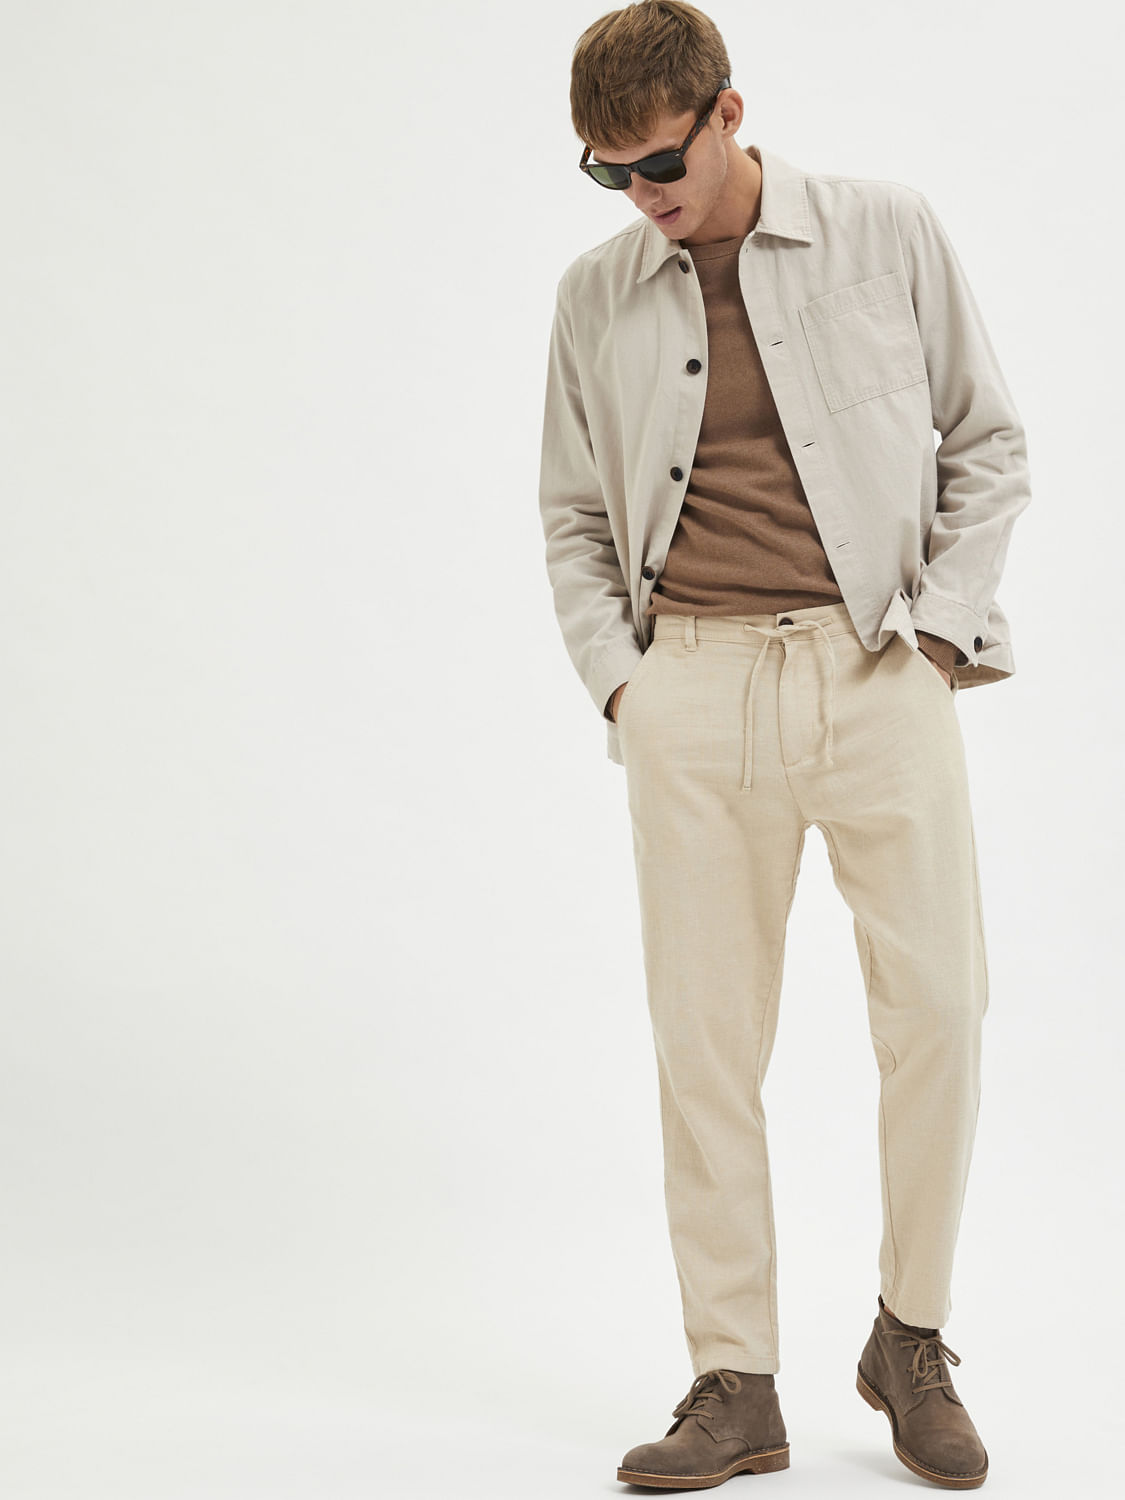 7 Stylish Ways to Wear Linen This Summer  Man of Many